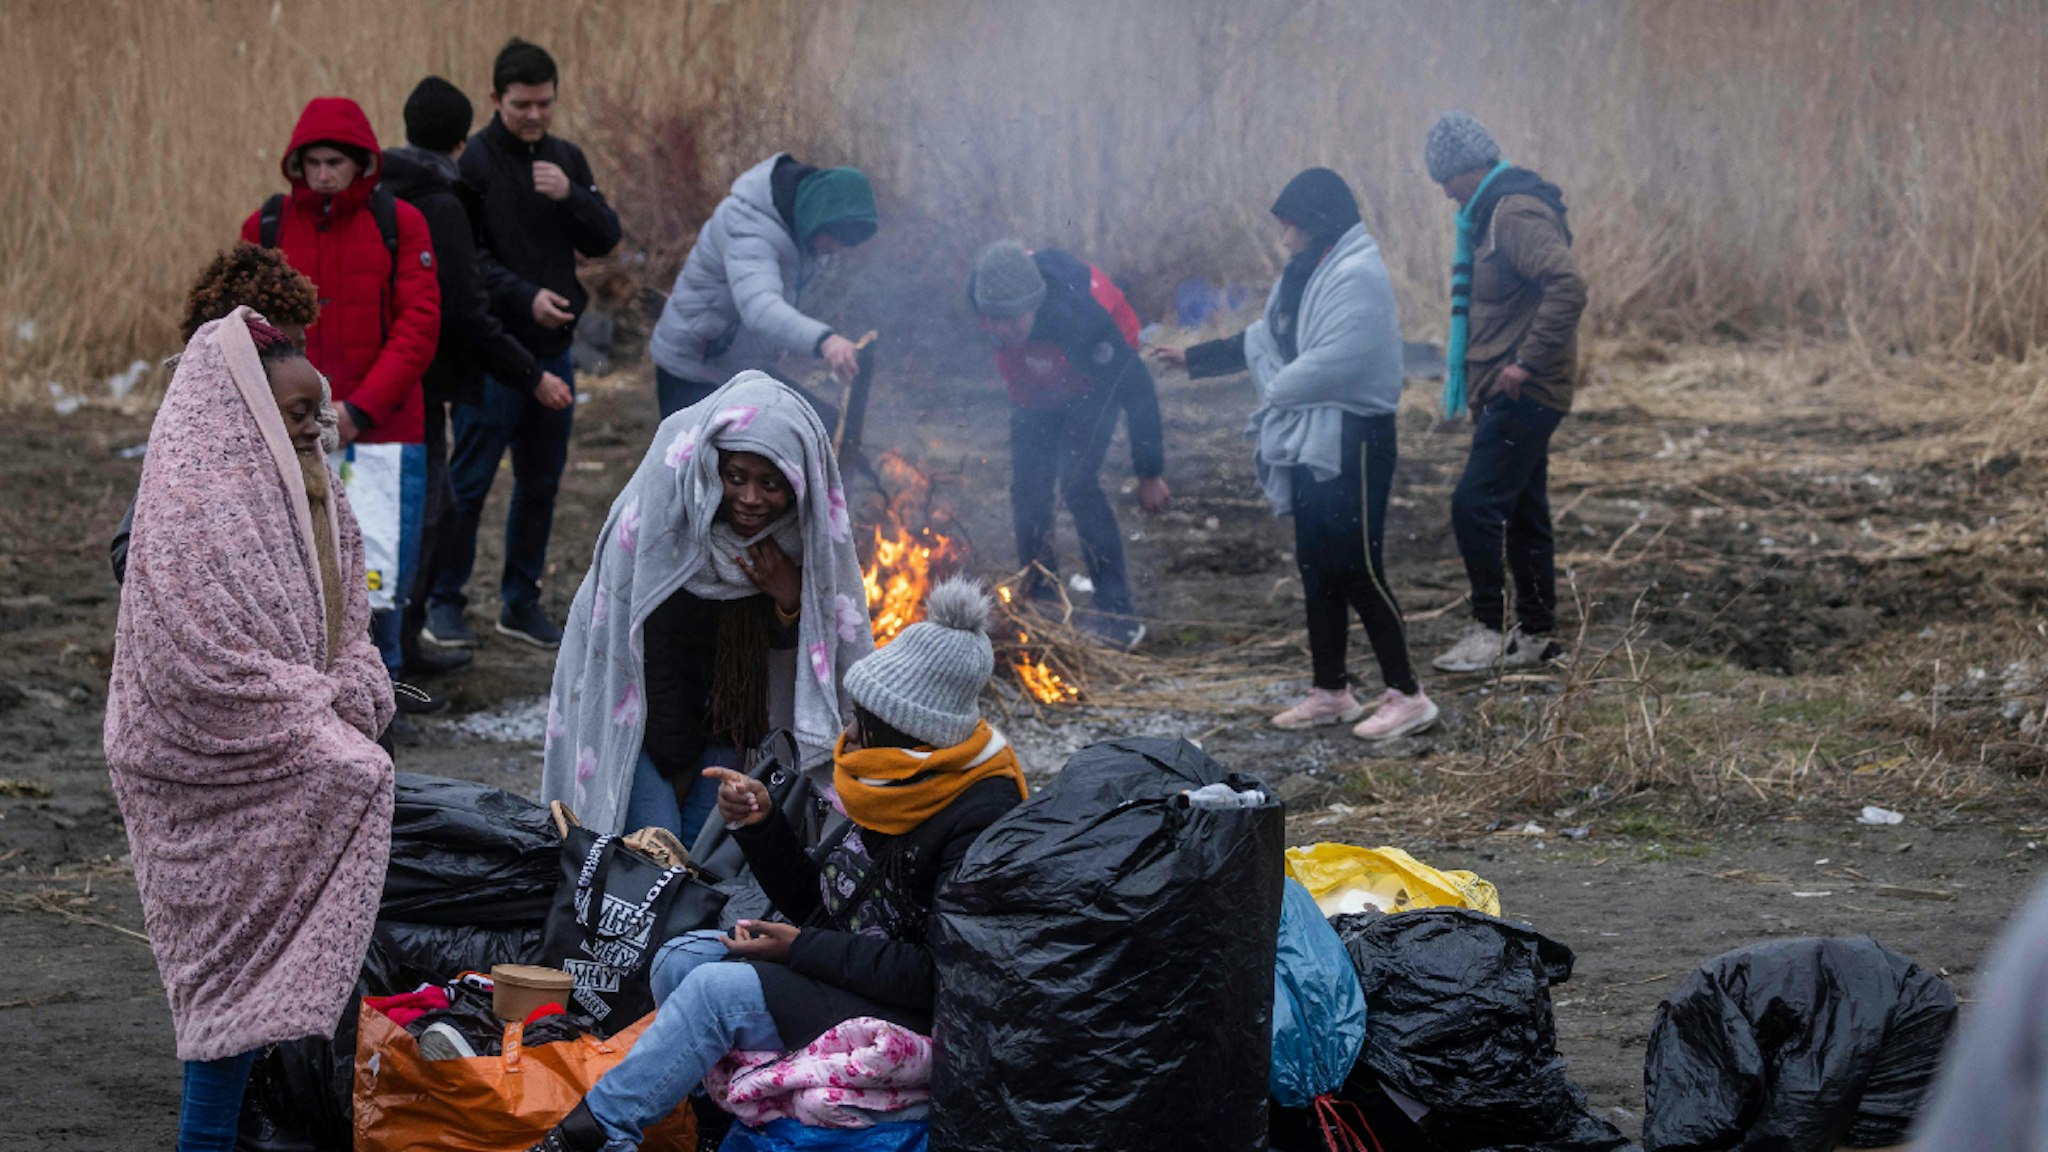 TOPSHOT - Refugees from many diffrent countries - from Africa, Middle East and India - mostly students of Ukrainian universities are seen at the Medyka pedestrian border crossing fleeing the conflict in Ukraine, in eastern Poland on February 27, 2022.